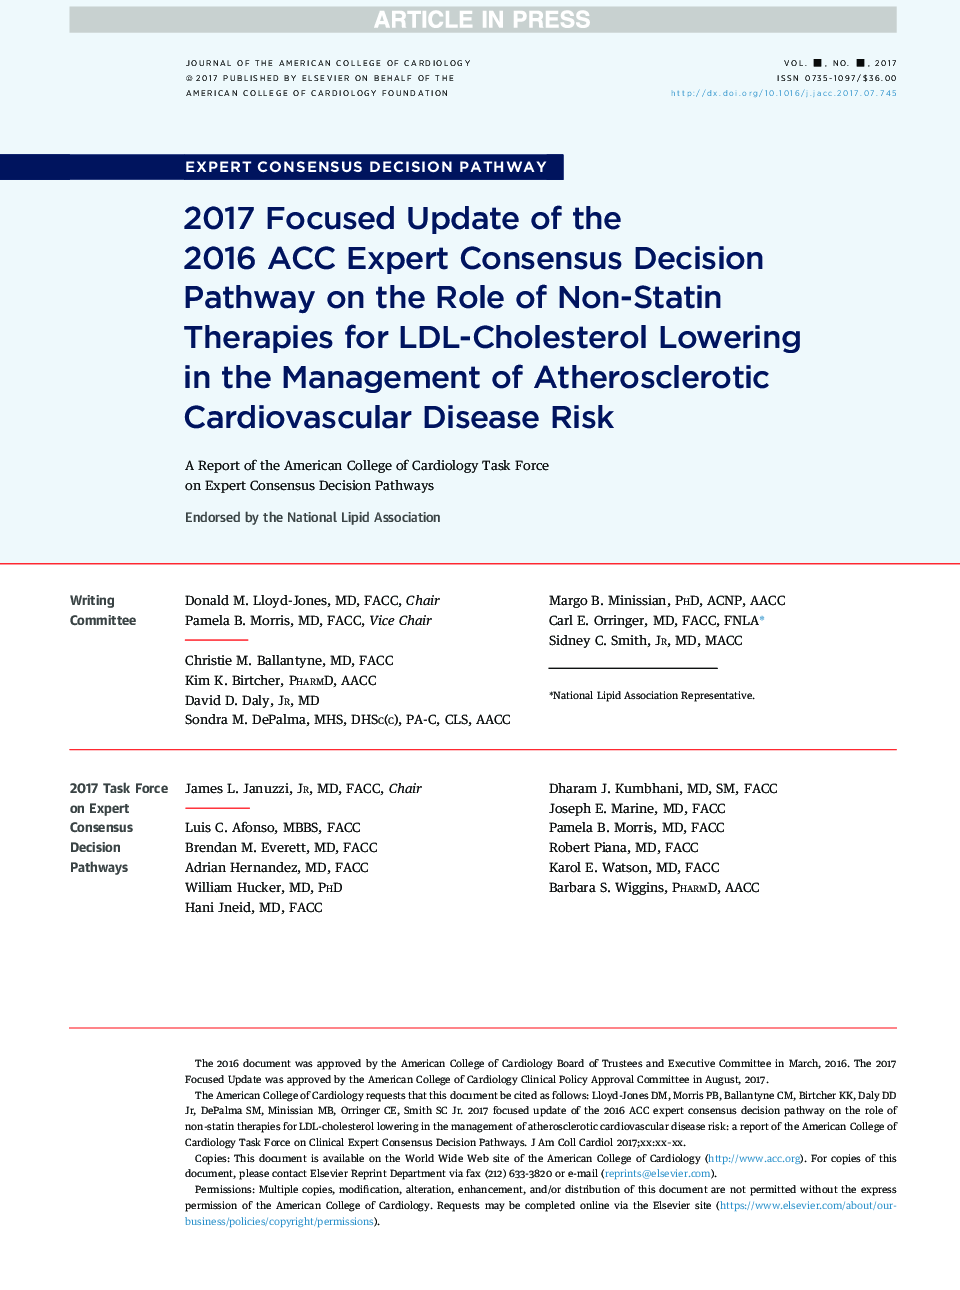 2017 Focused Update of the 2016Â ACCÂ Expert Consensus Decision Pathway on the Role of Non-Statin Therapies for LDL-Cholesterol Lowering inÂ the Management of Atherosclerotic Cardiovascular Disease Risk